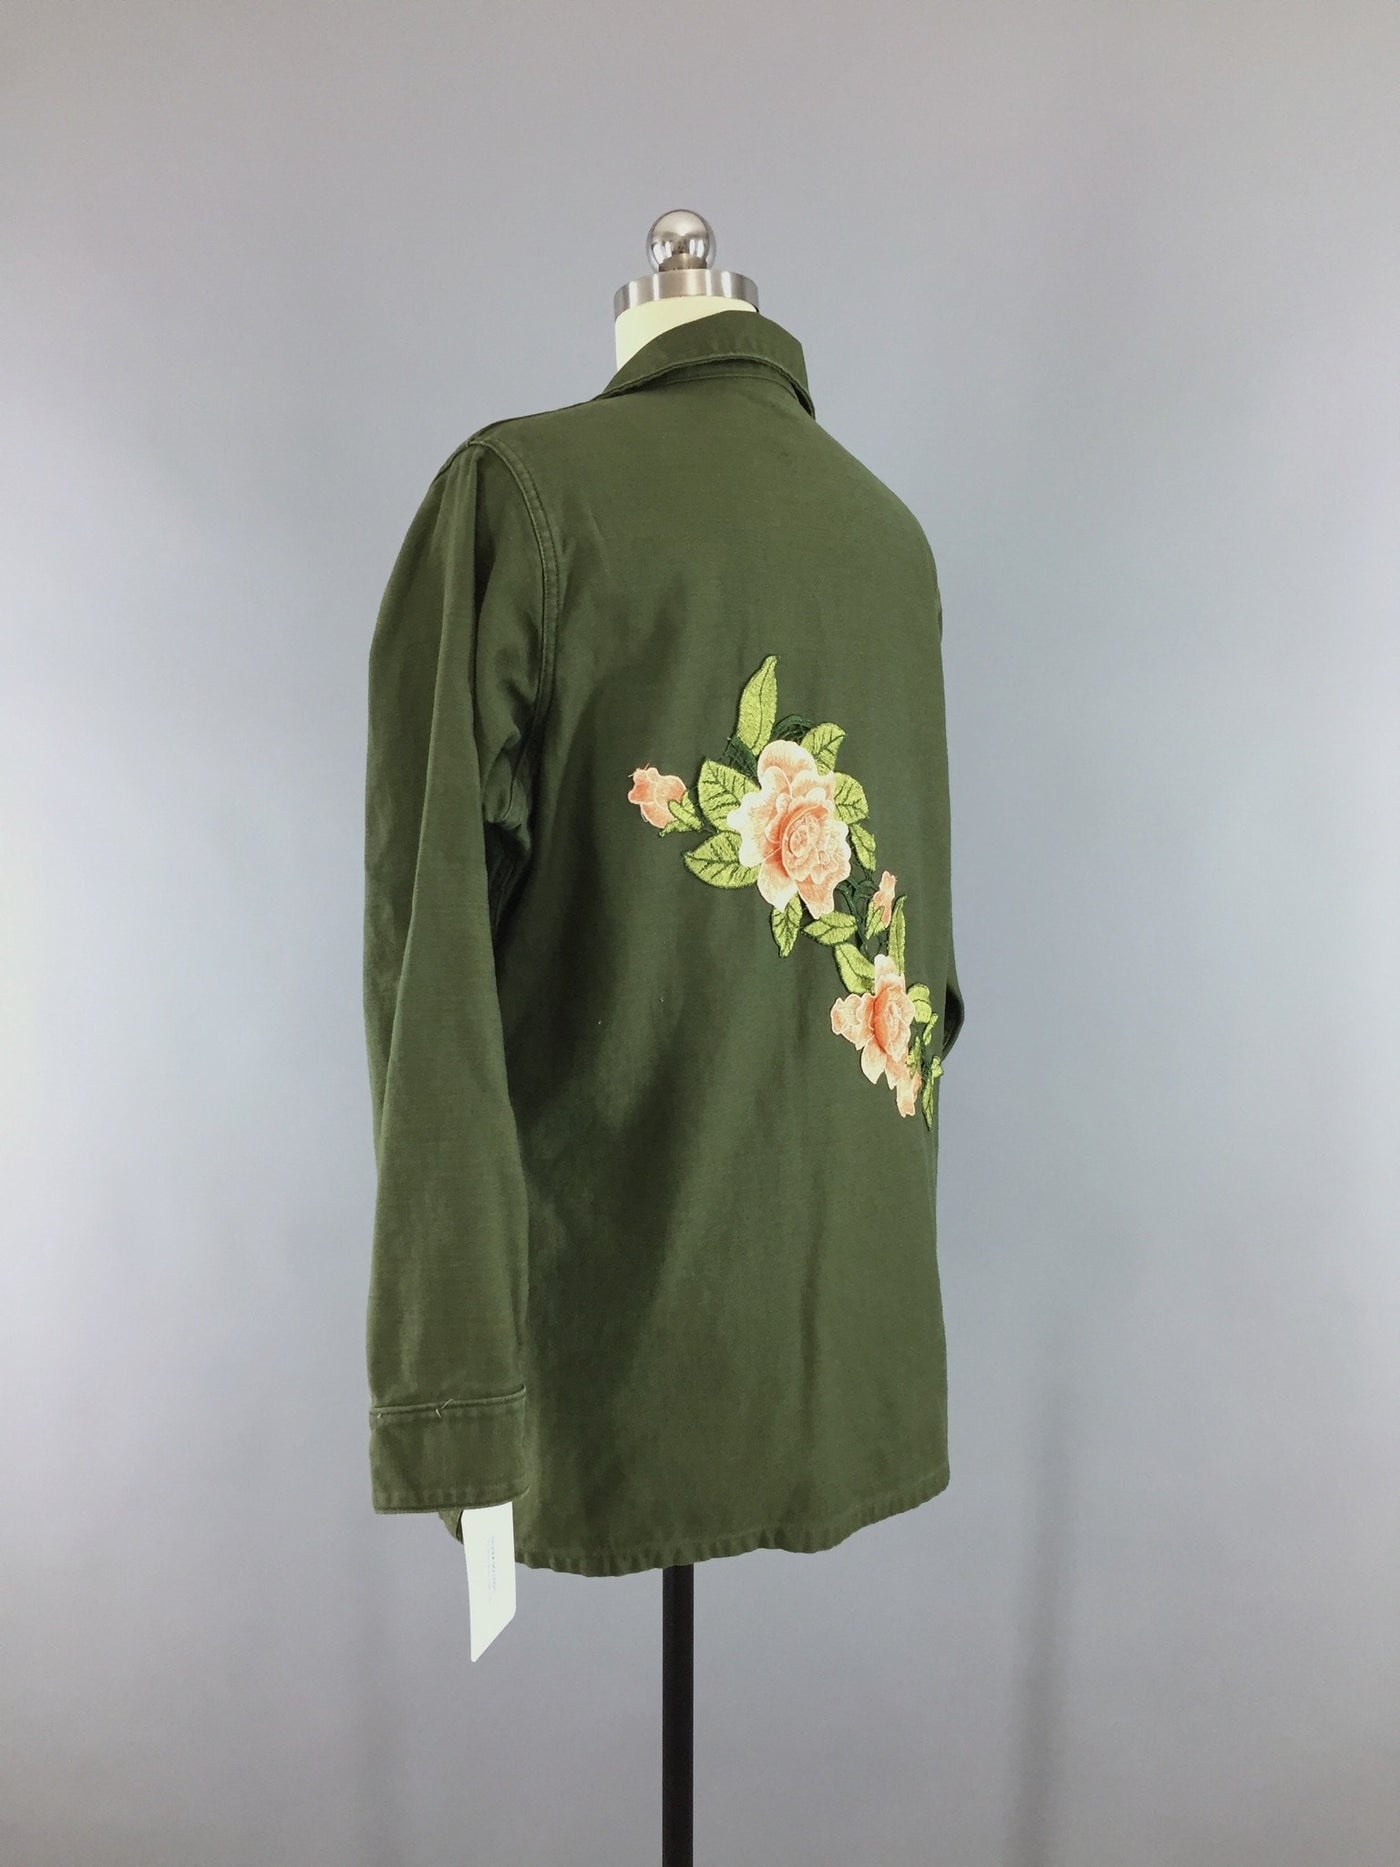 1970s Vintage Embroidered US Army Jacket / Peach Floral Embroidery / Unicorn Patch - ThisBlueBird